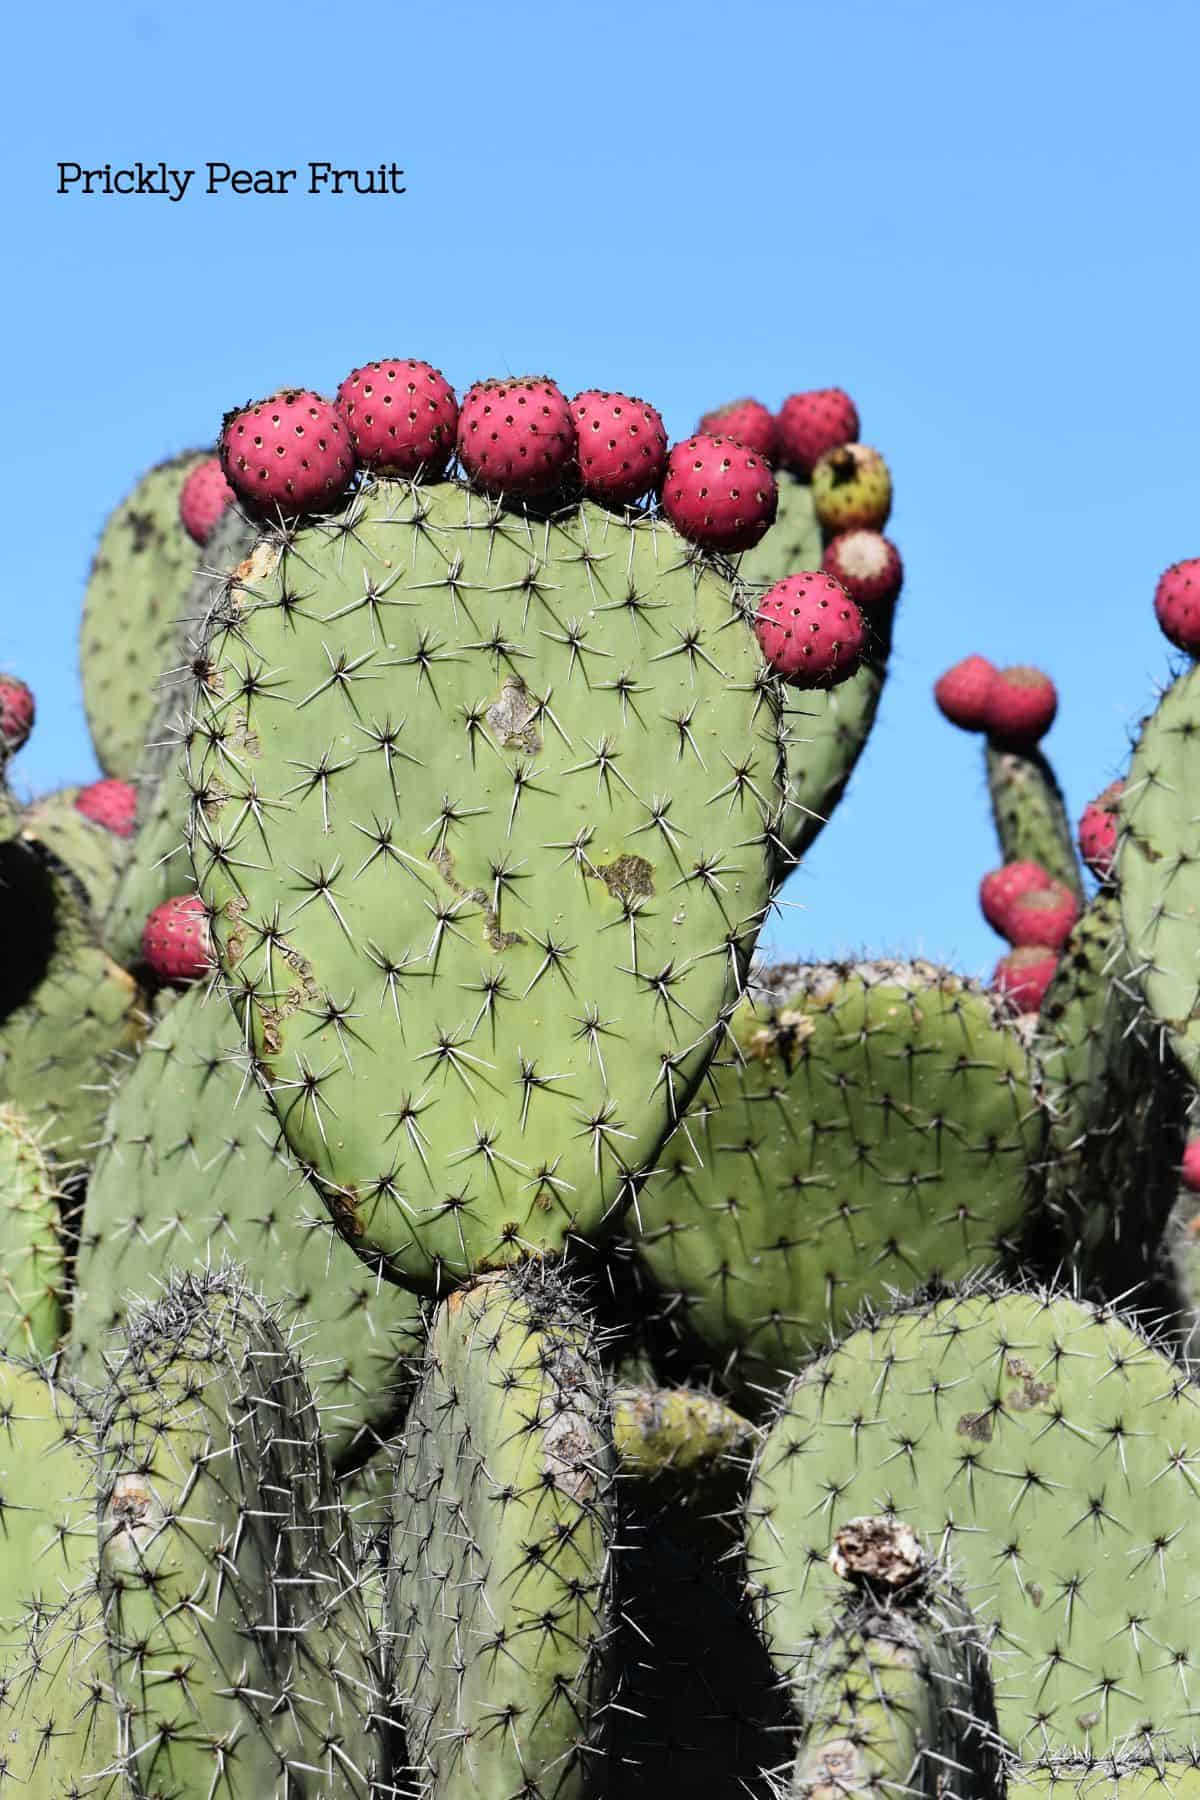 Prickly pear cactus with several pads (nopales) with red oval fruits on the tips of a few of the pads representing the fruit of the cactus.